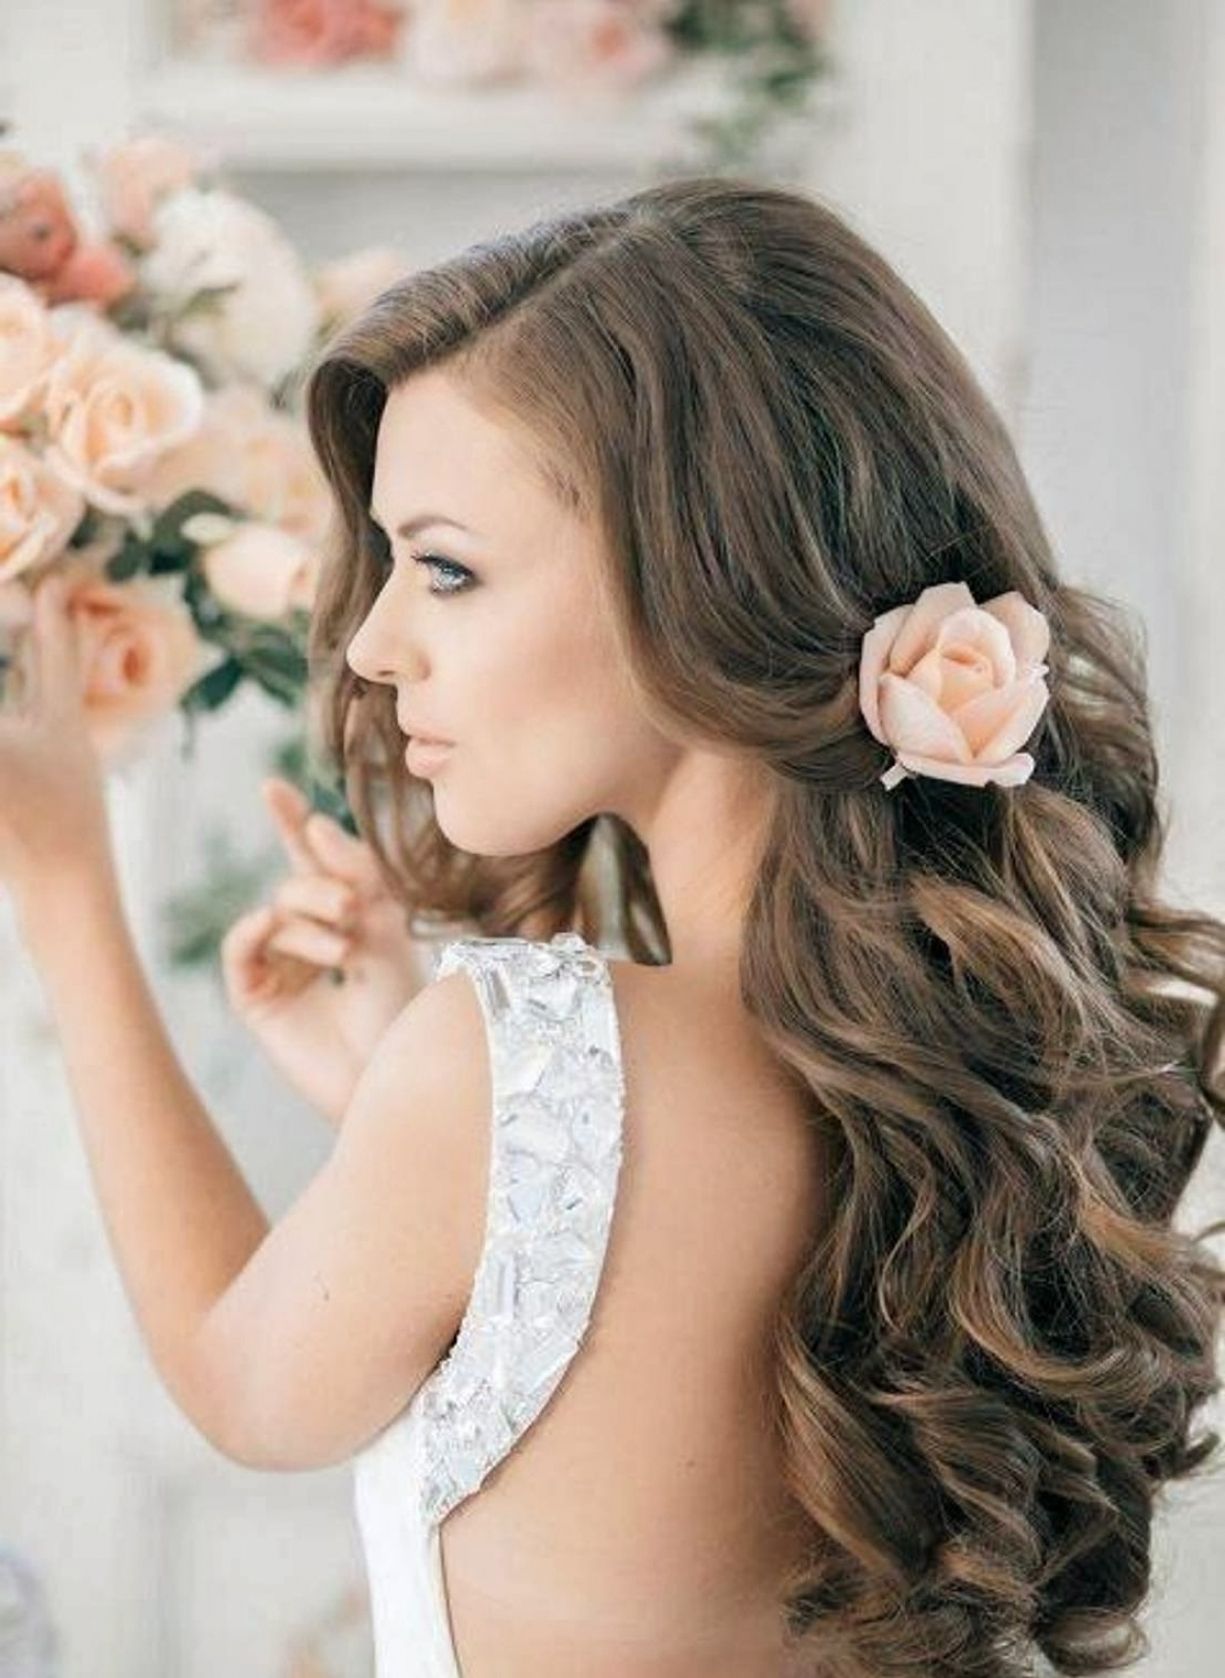 Hairstyle Down Wedding Hairstyle Long Hair Down Black Hair With Regard To Most Recent Wedding Hairstyles For Long Wavy Hair (View 9 of 15)